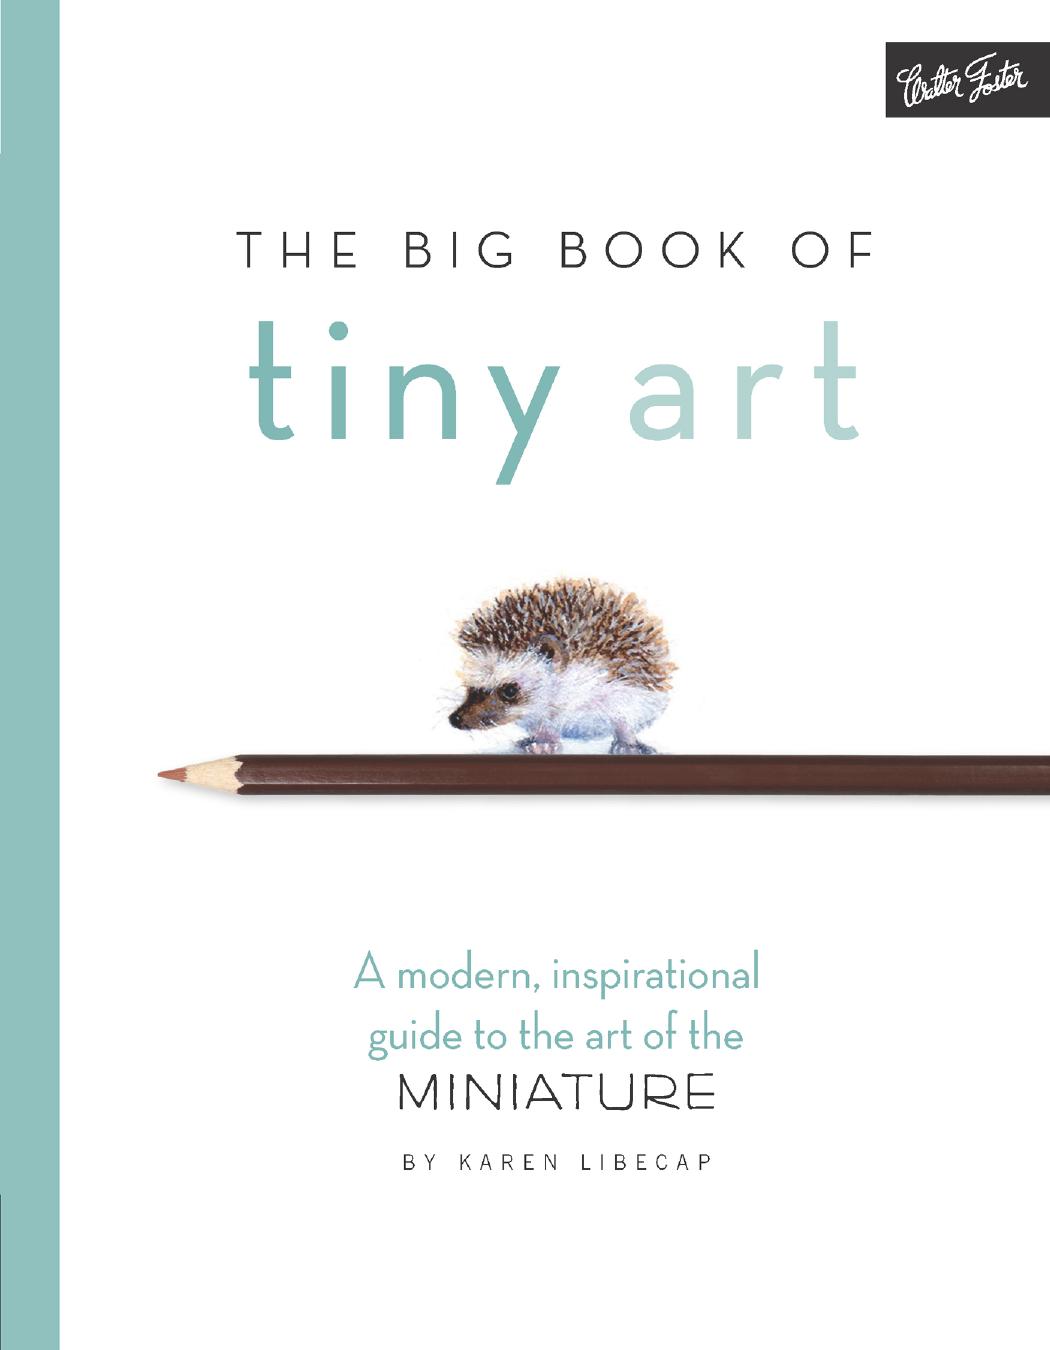 The Big Book Of Tiny Art: A Modern, Inspirational Guide to the art of the Miniature by Karen Libecap